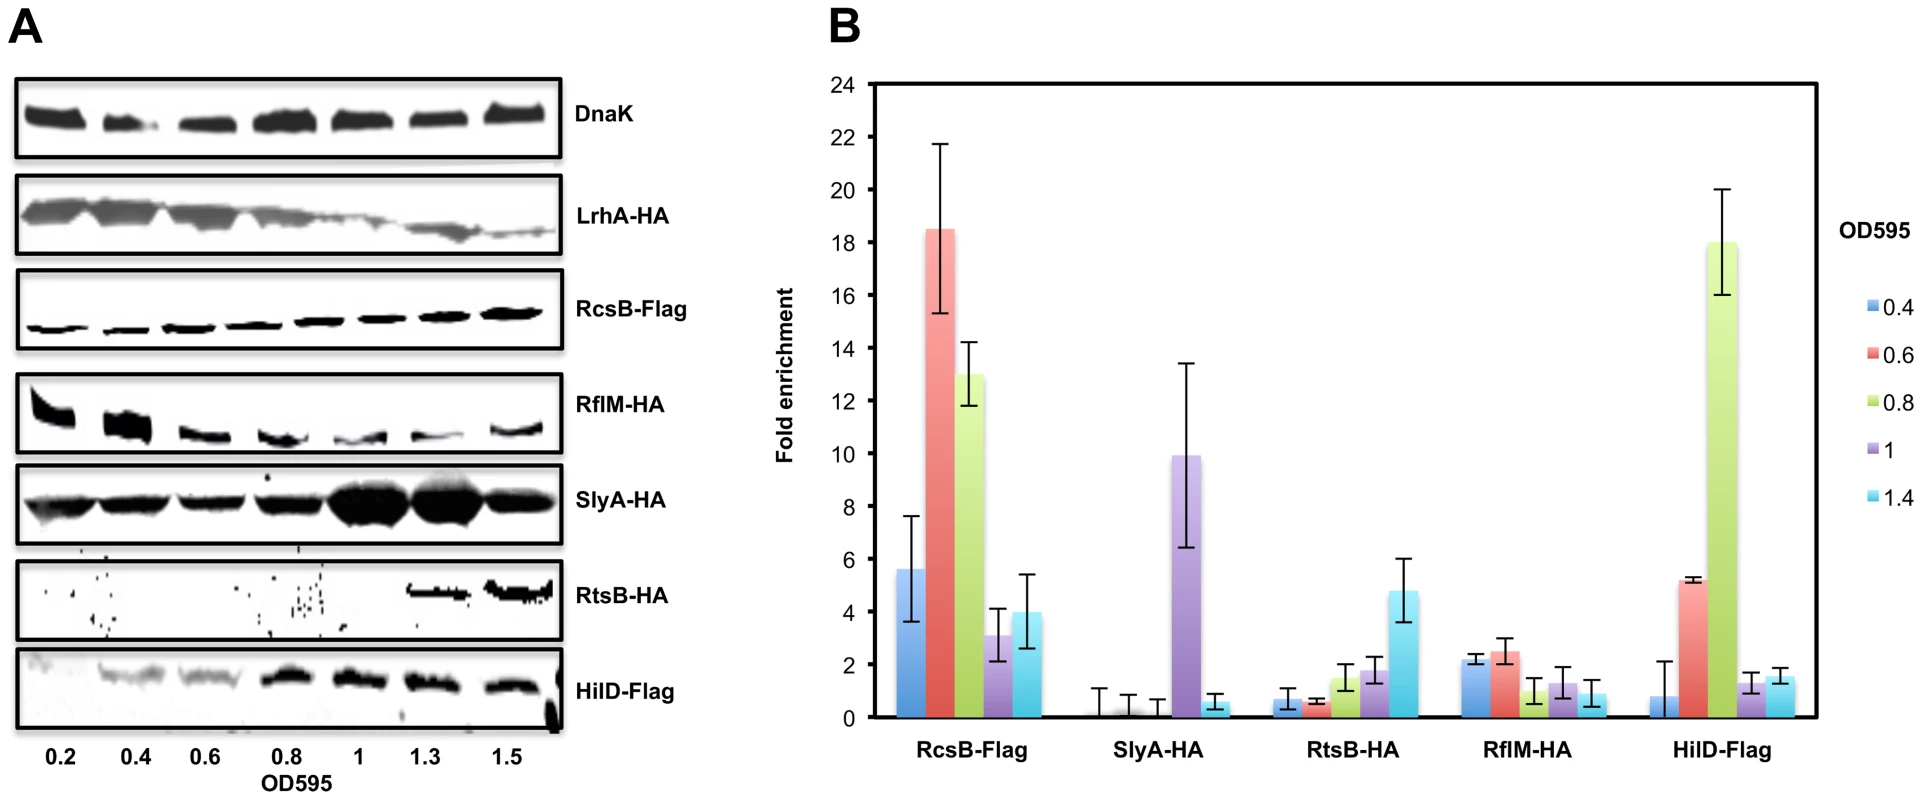 The expression levels and the in-vivo binding of regulatory factors controlling <i>flhDC</i> operon transcription during cell growth phases.